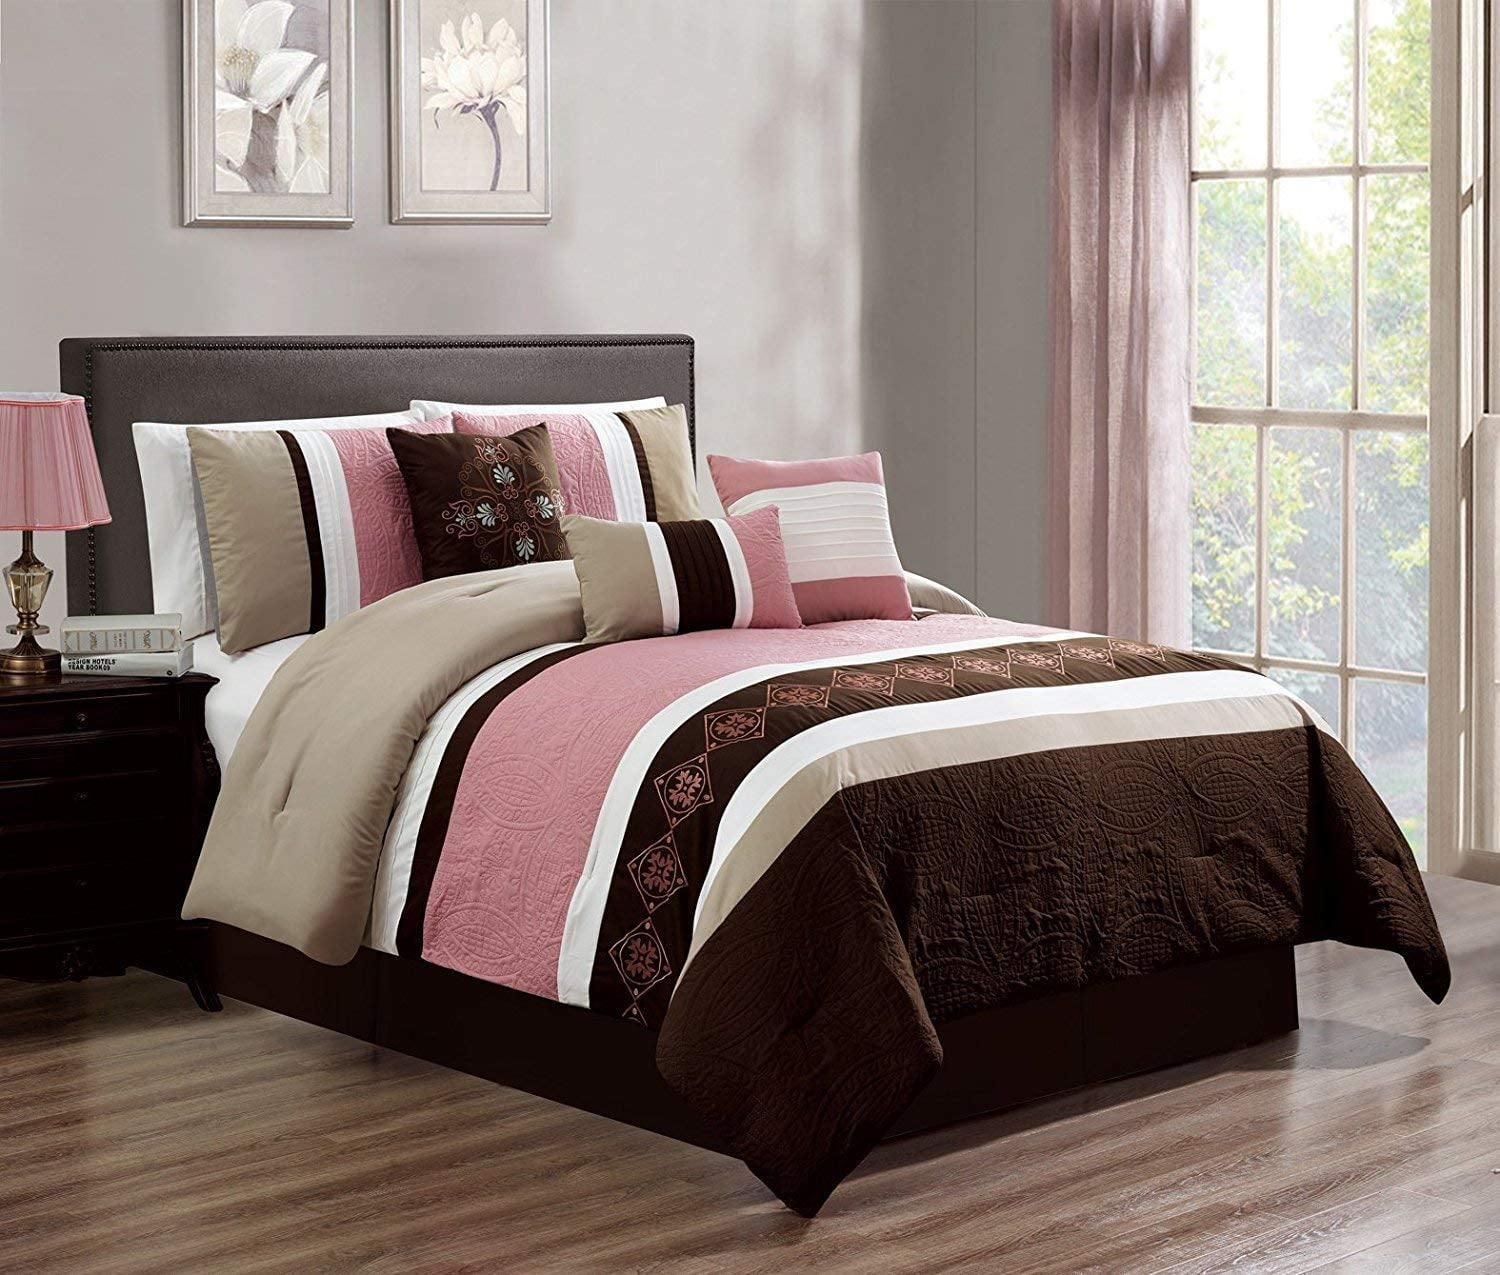 Details about   Microfiber Comforter Set Luxury Embroidery Bed in Bag Devaki 7PCS Cal King Size 